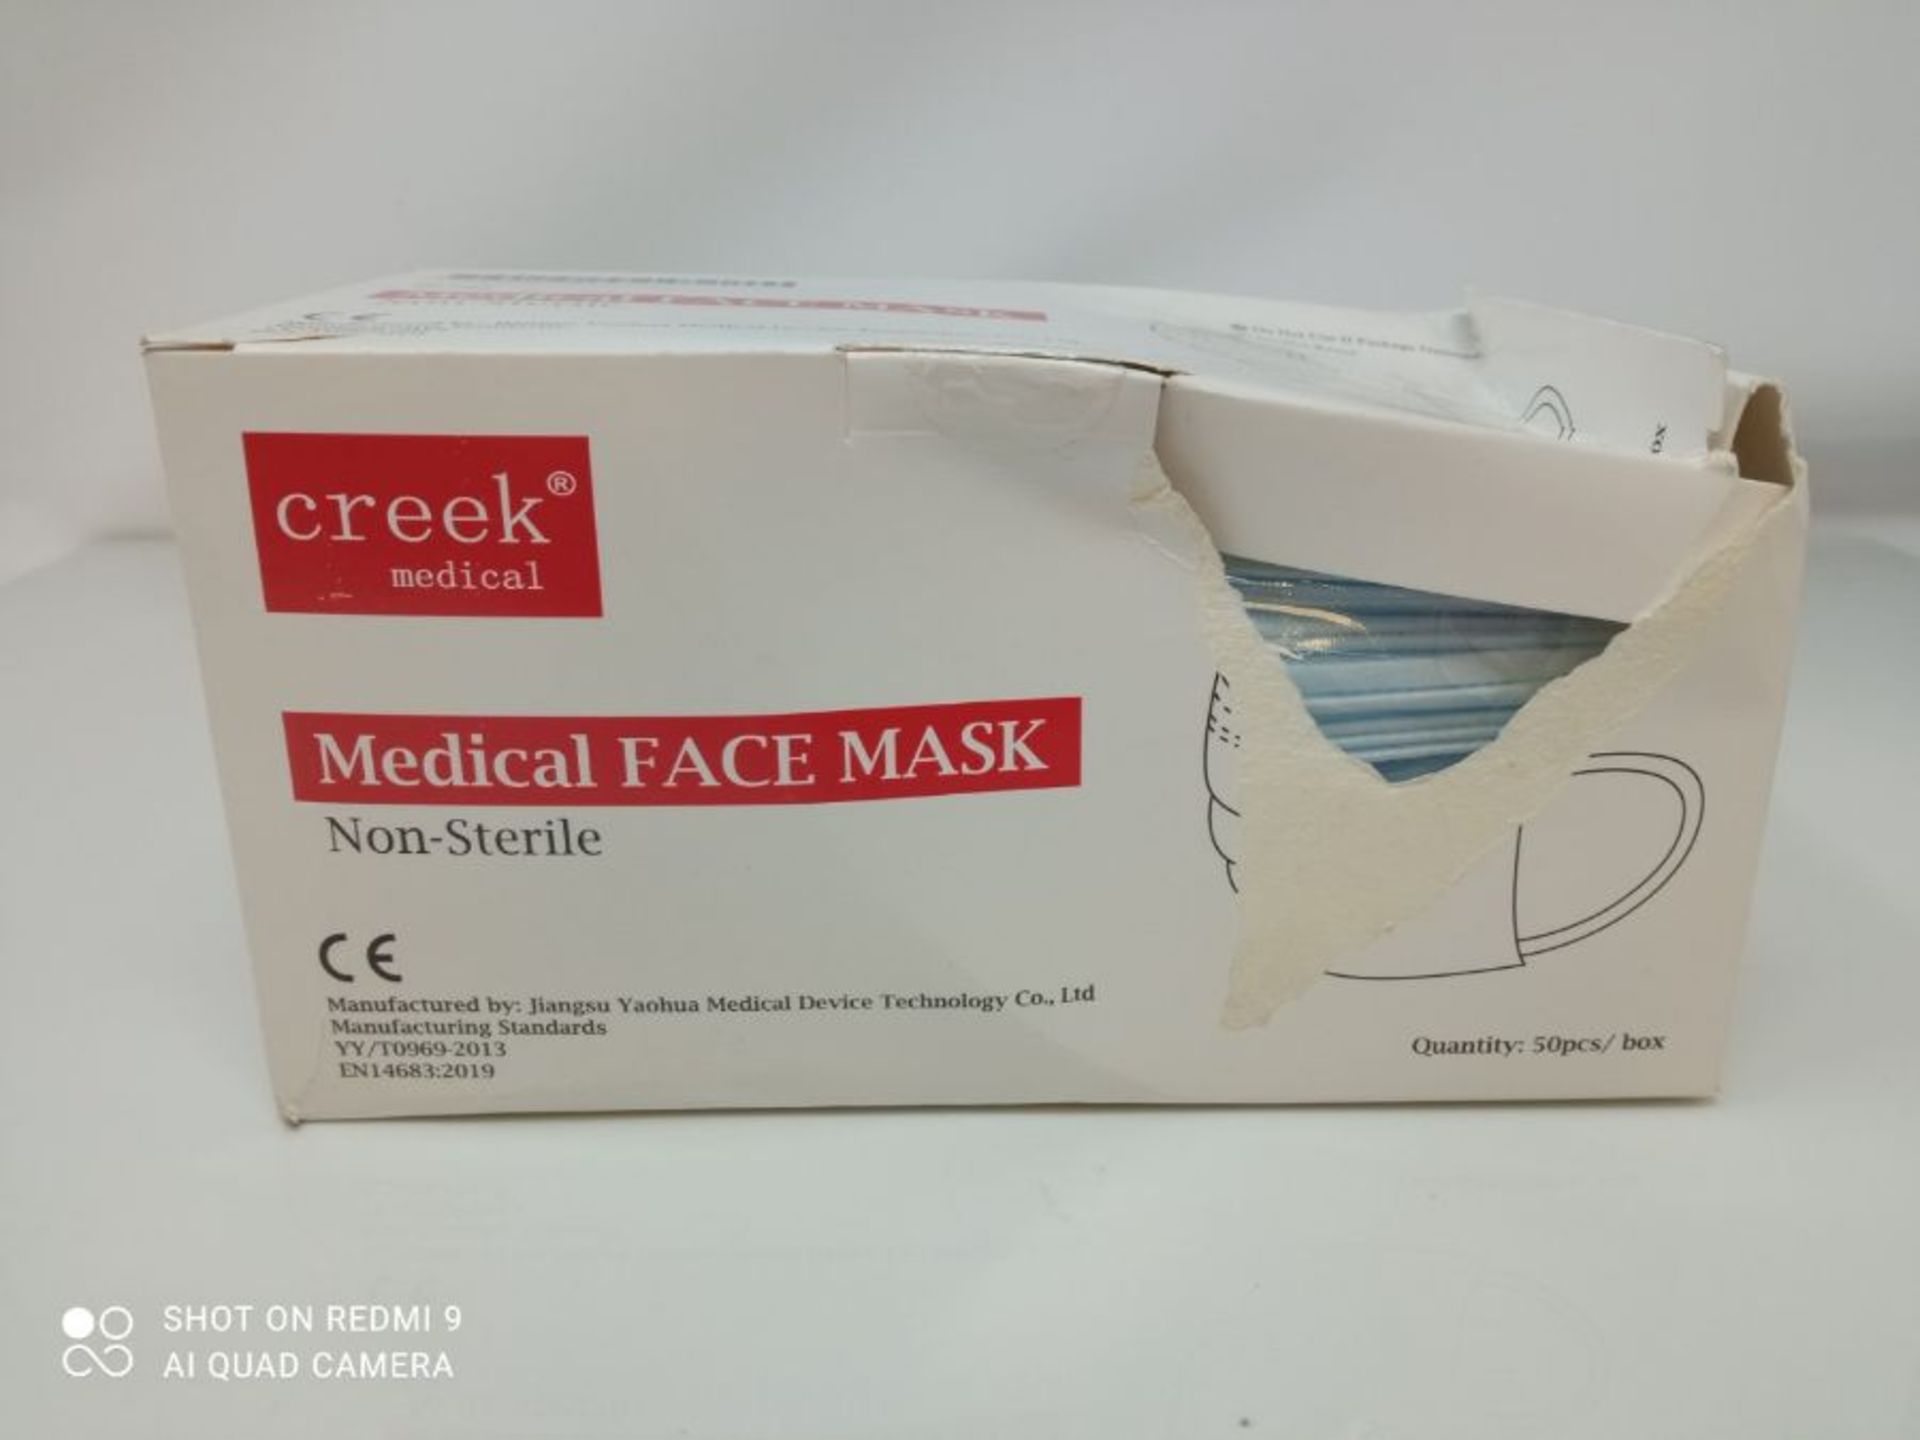 creek medical CE Approved and Tested 3-Layer Medical Surgical Mask Type I, Non-Sterile - Image 2 of 3